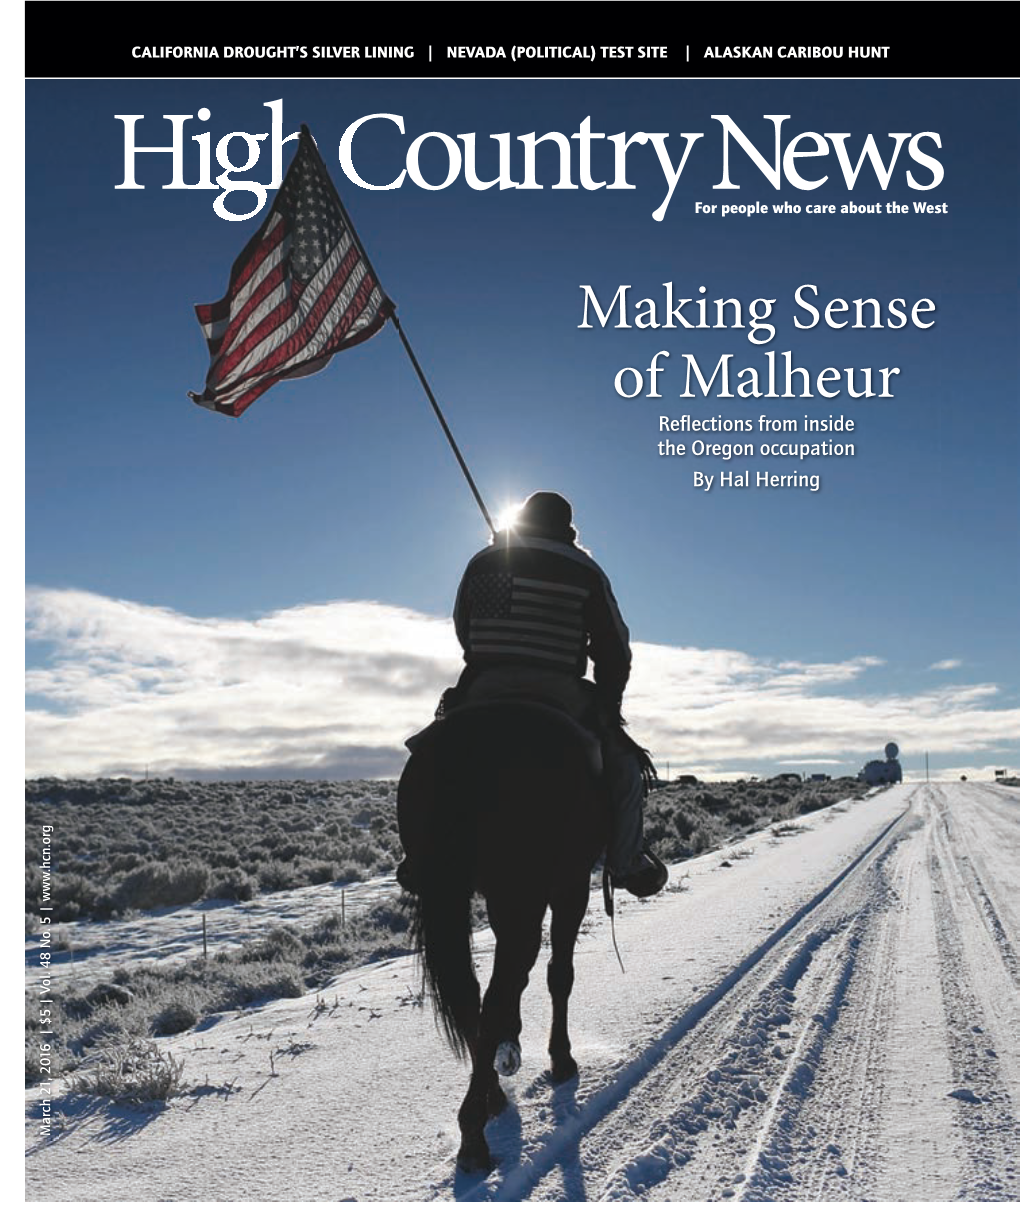 Making Sense of Malheur Reﬂections from Inside the Oregon Occupation by Hal Herring March 21, 2016 | $5 | Vol